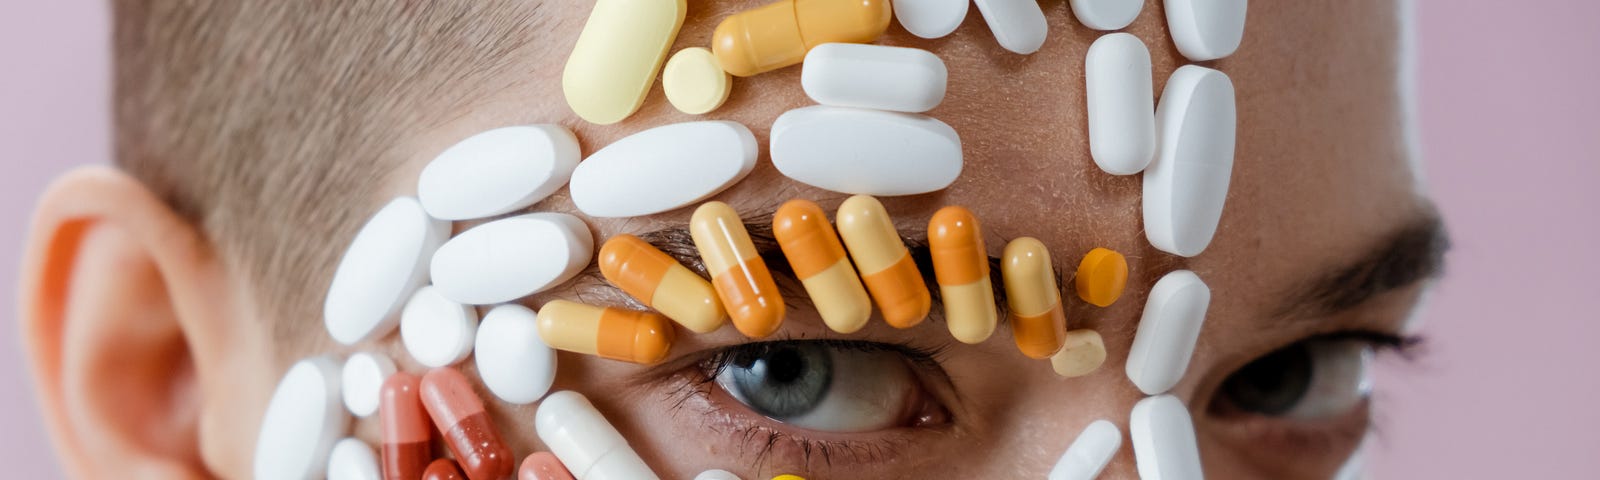 Woman with a variety of pills stuck to her face.